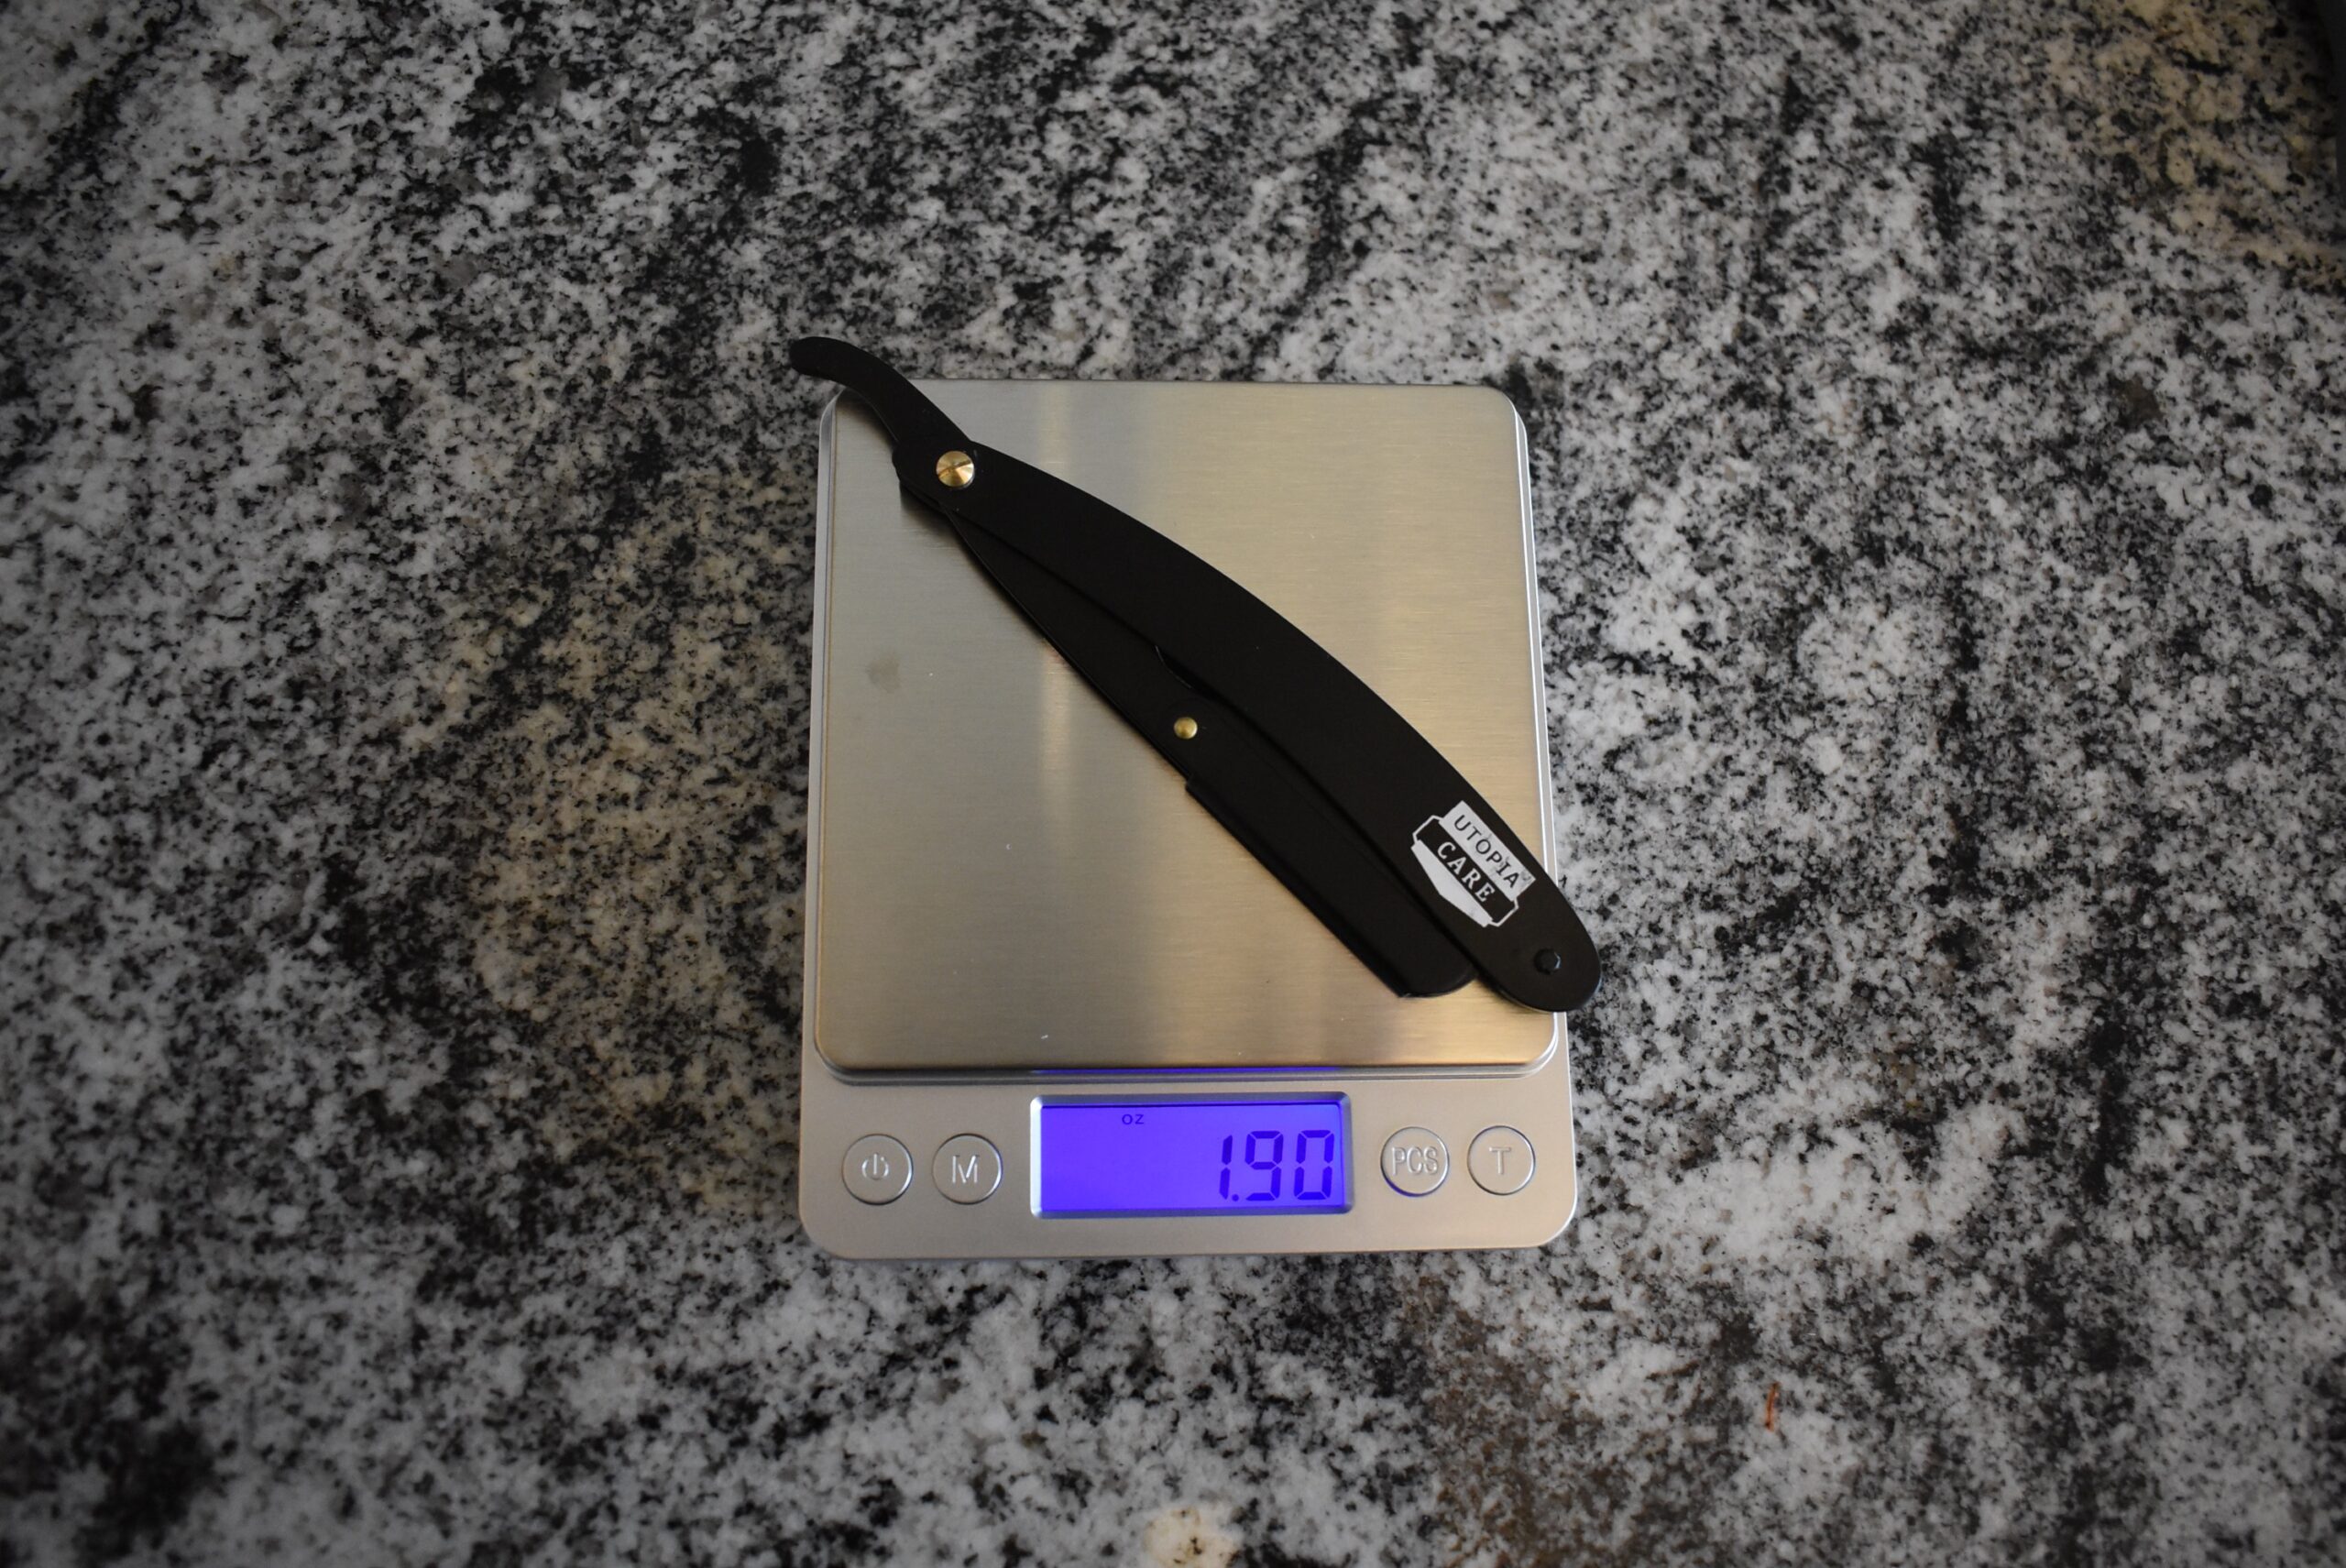 Utopia Care straight razor sitting on a kitchen scale weighing 1.90 oz